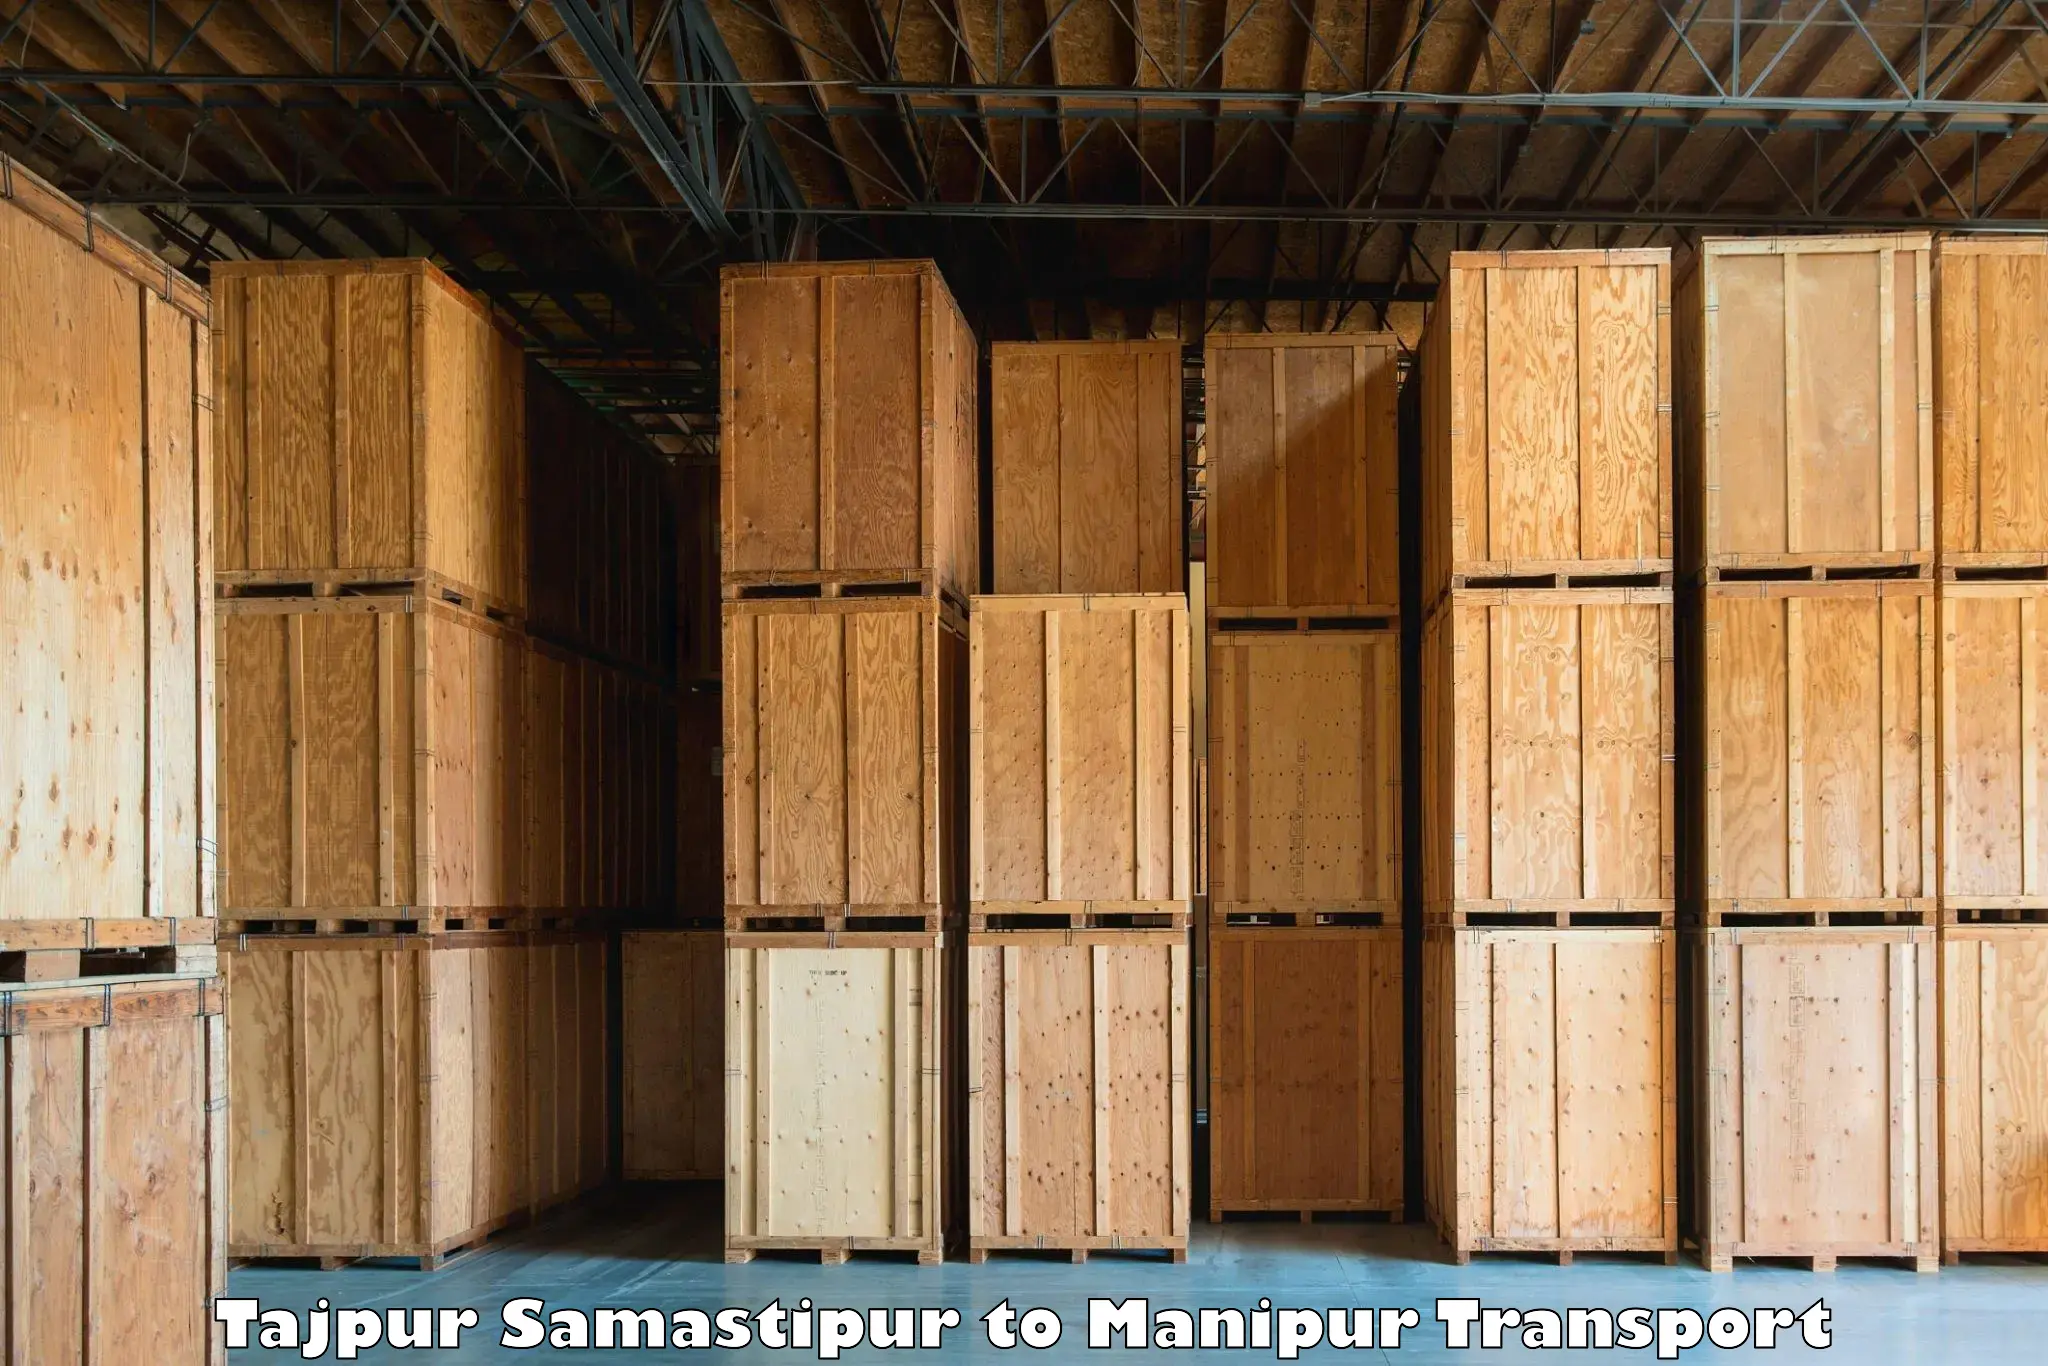 Container transport service Tajpur Samastipur to Imphal